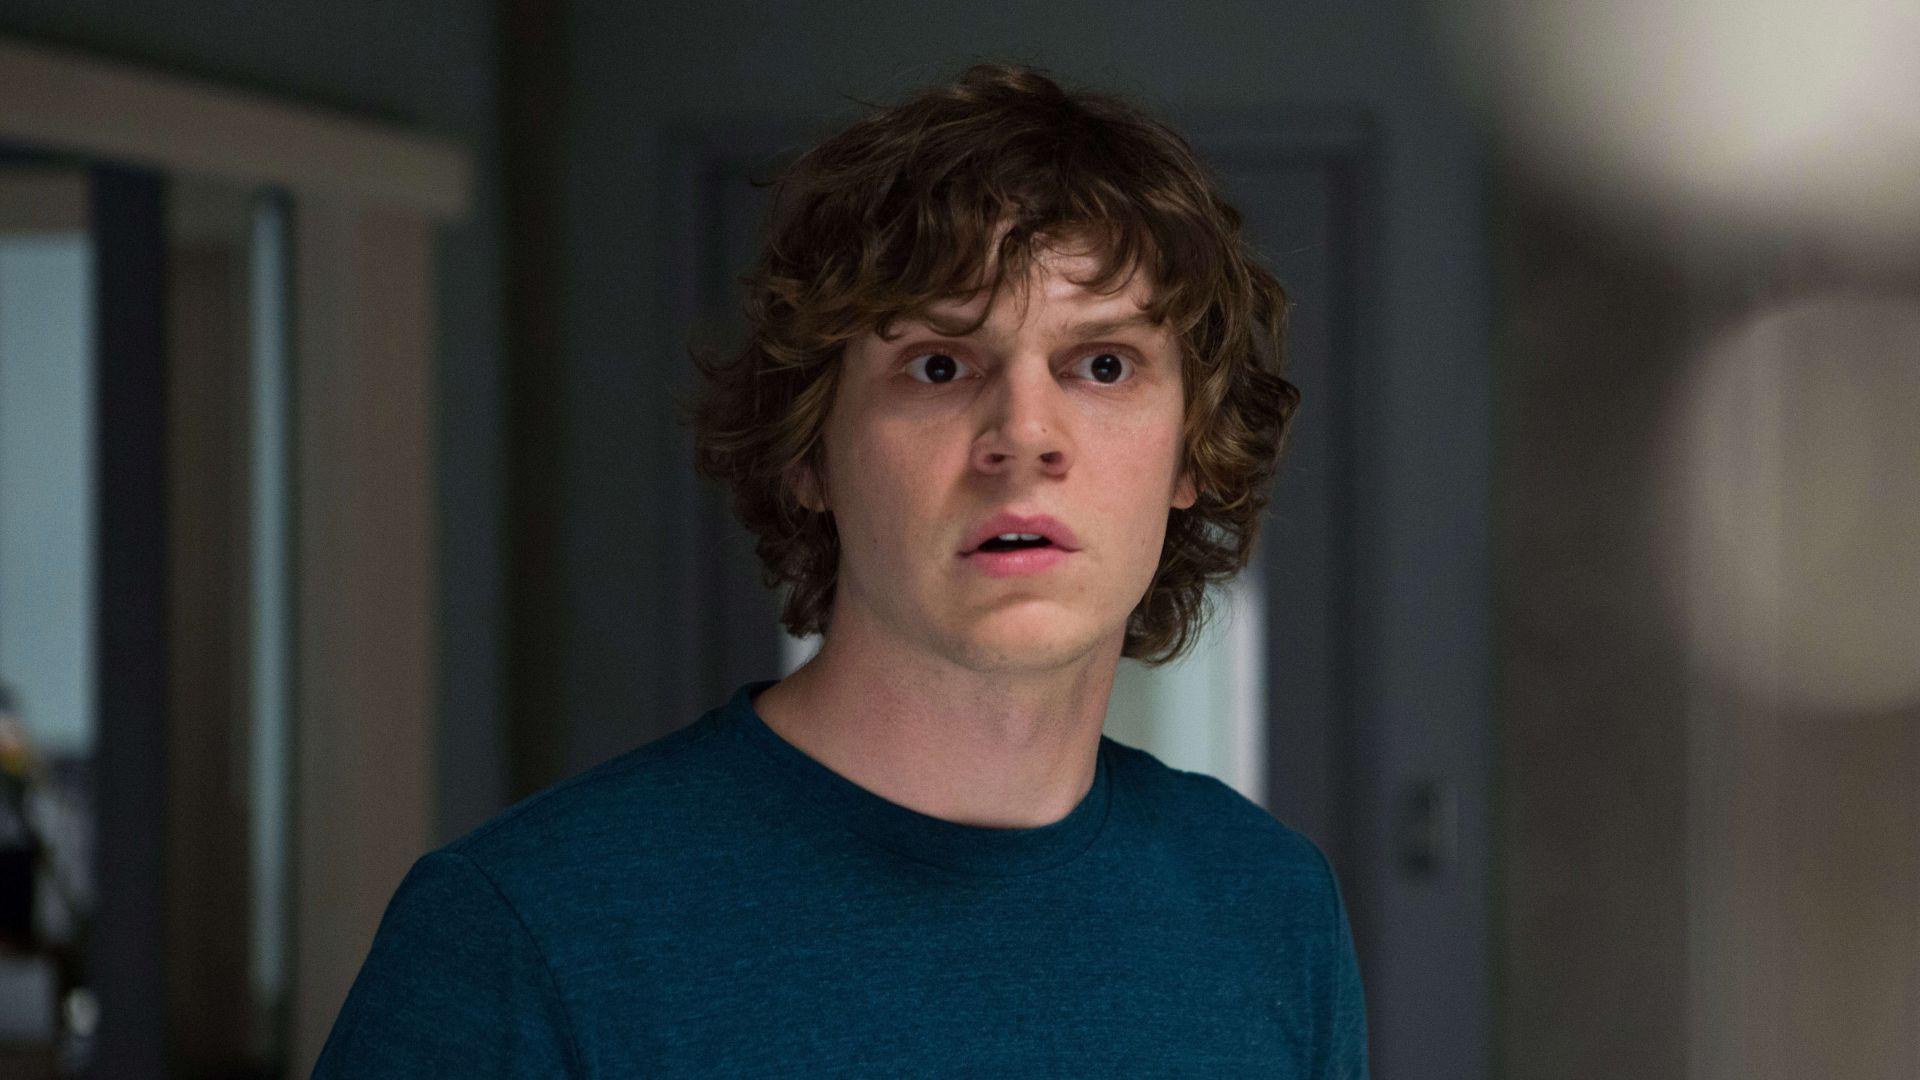 Evan Peters Wallpaper High Resolution and Quality Download